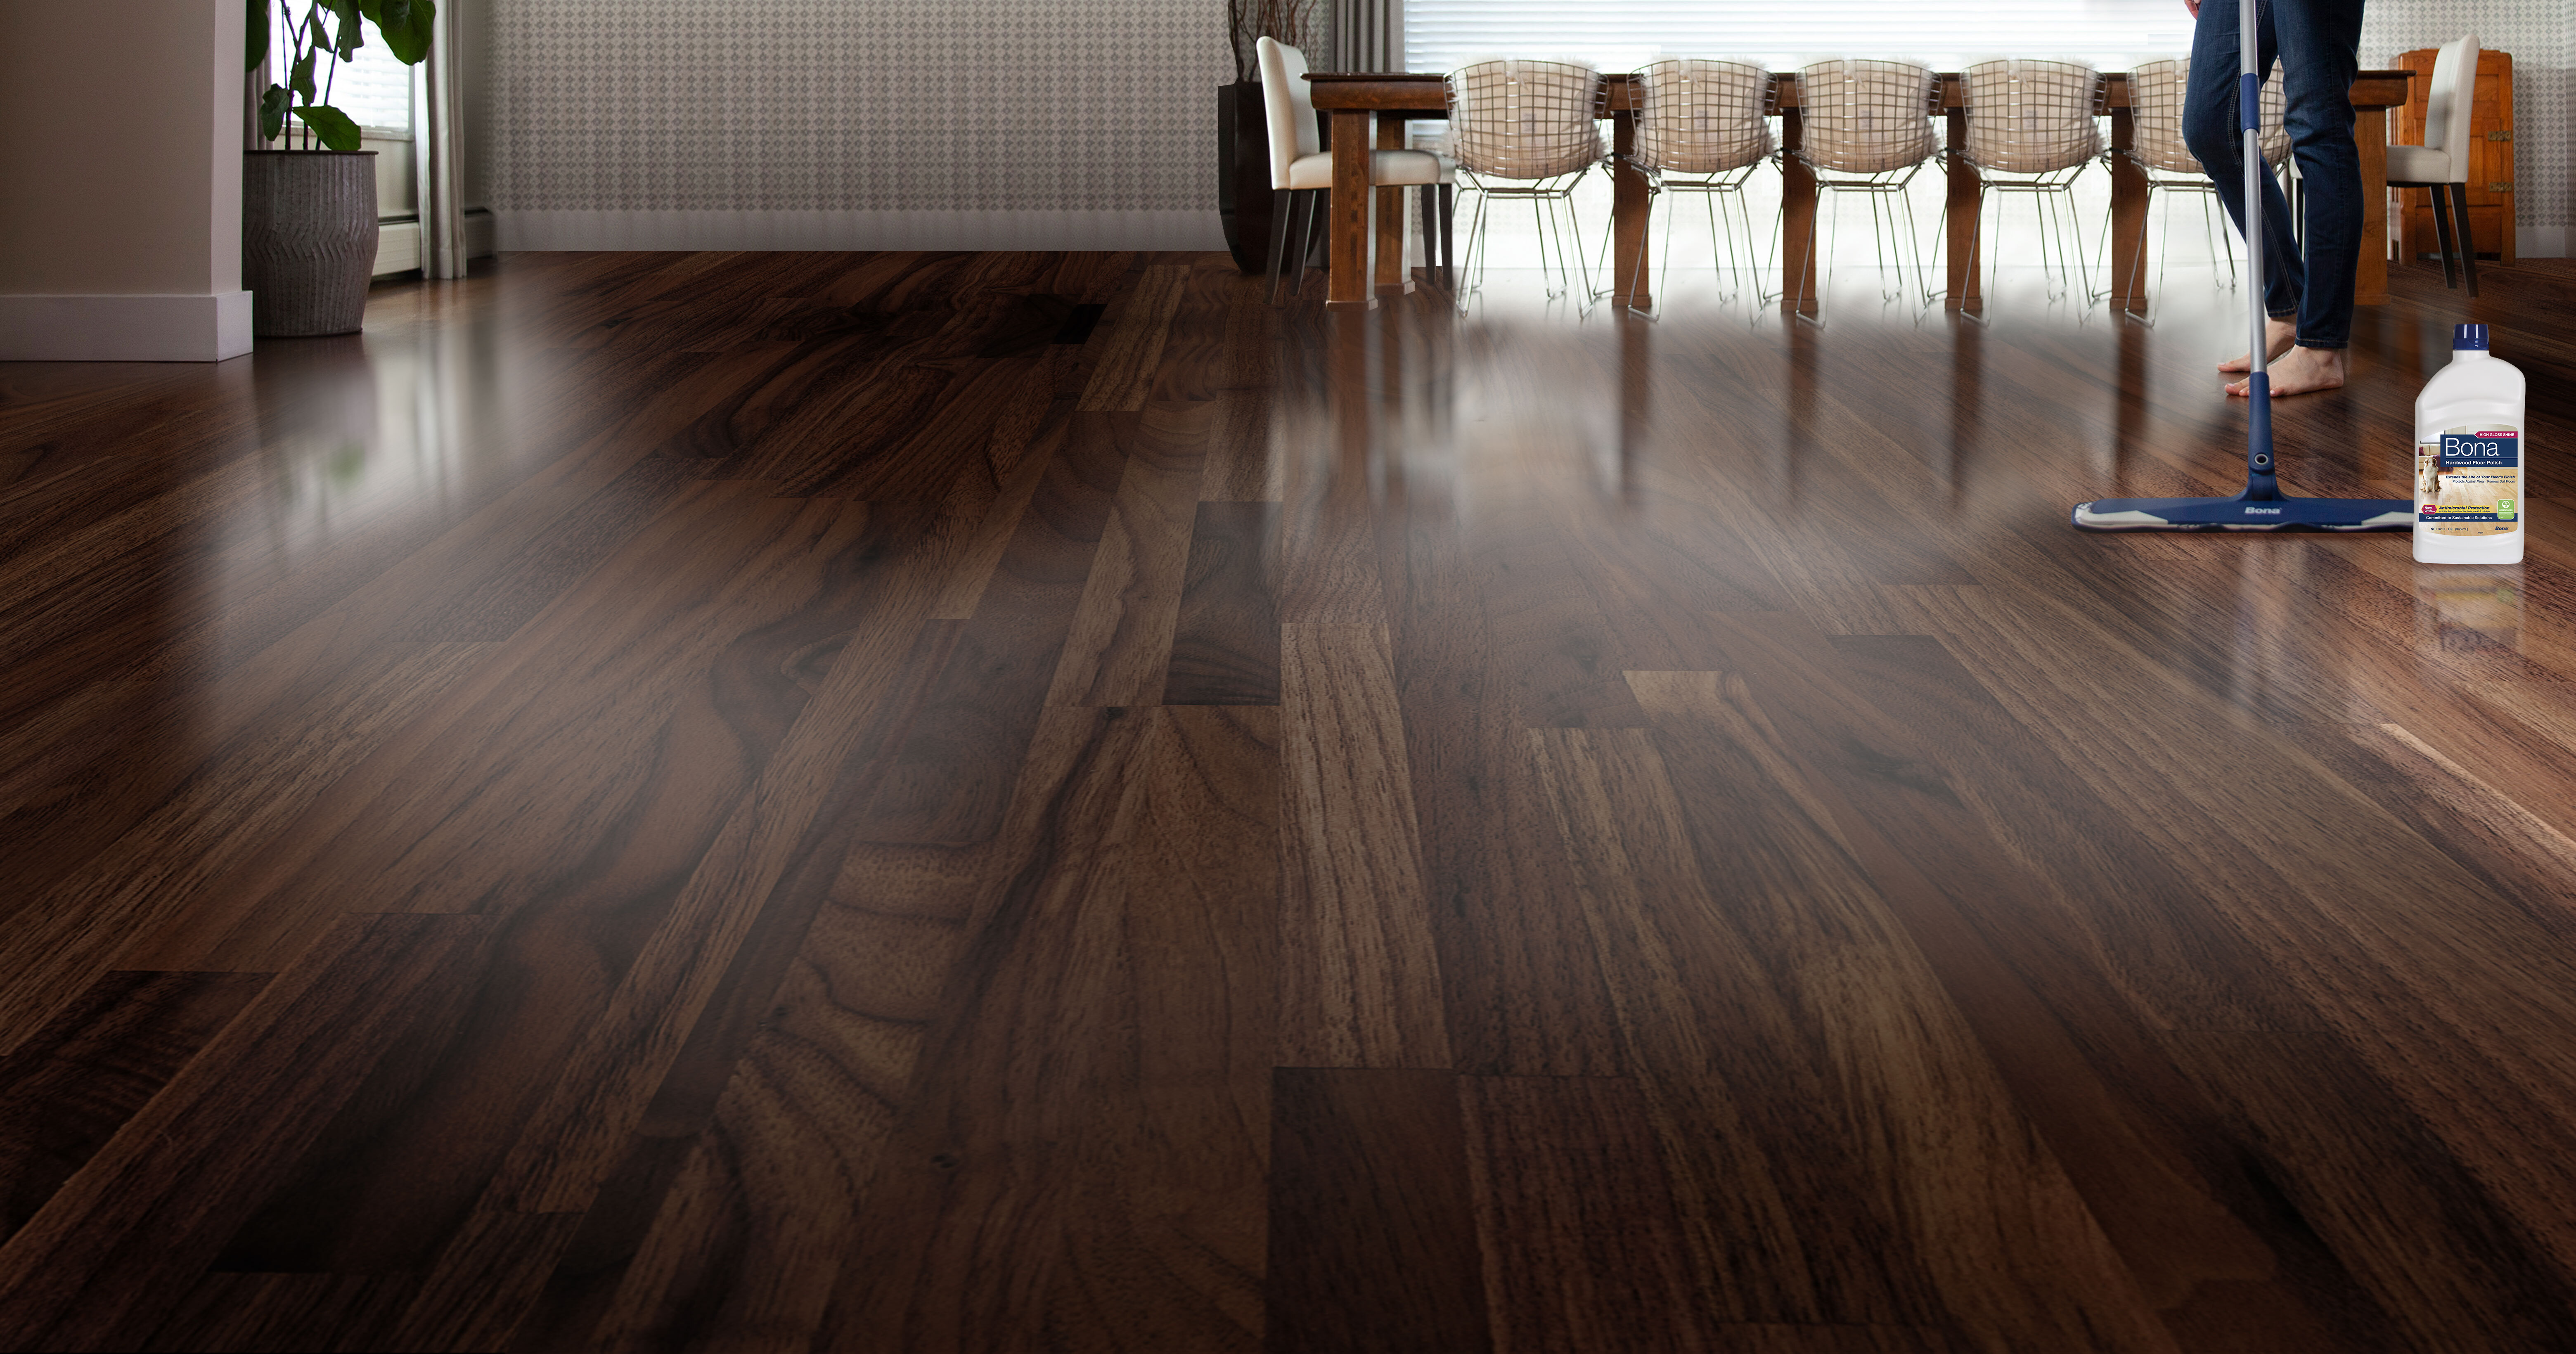 How To Polish Hardwood Floors Do S And, How To Polish Hardwood Floors Yourself